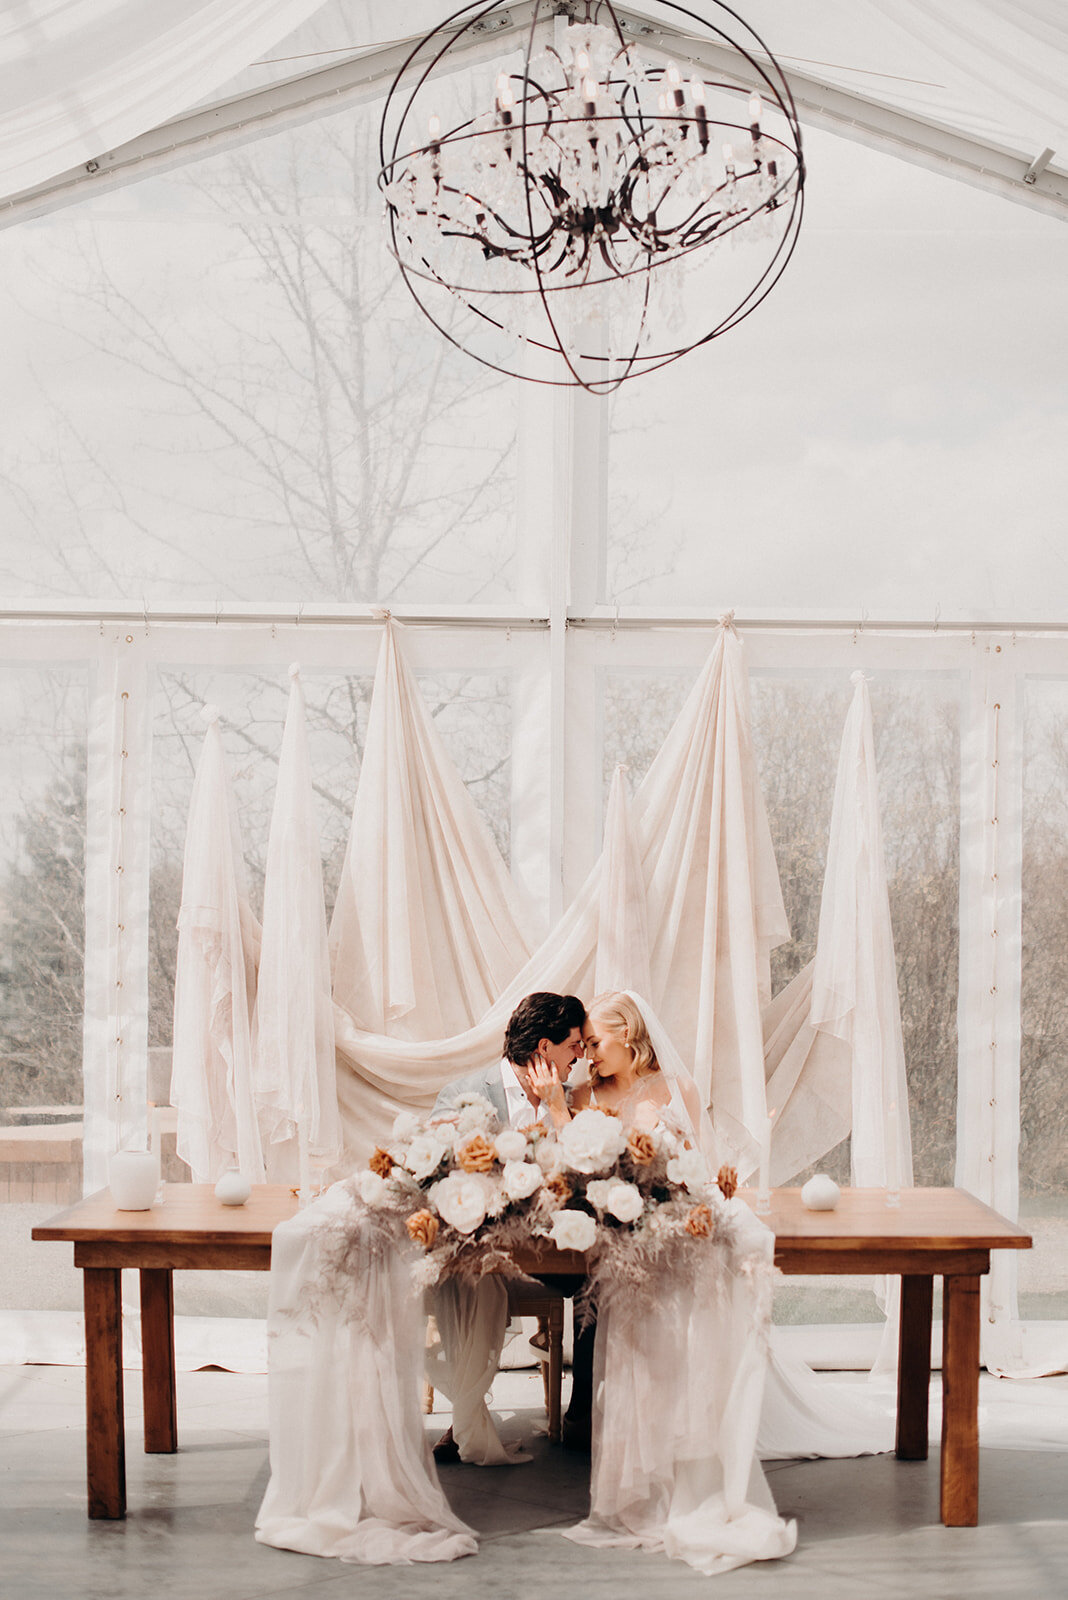 Elegant and contemporary indoor reception at Pine & Pond, a natural picturesque wedding venue in Ponoka, AB, featured on the Brontë Bride Vendor Guide.